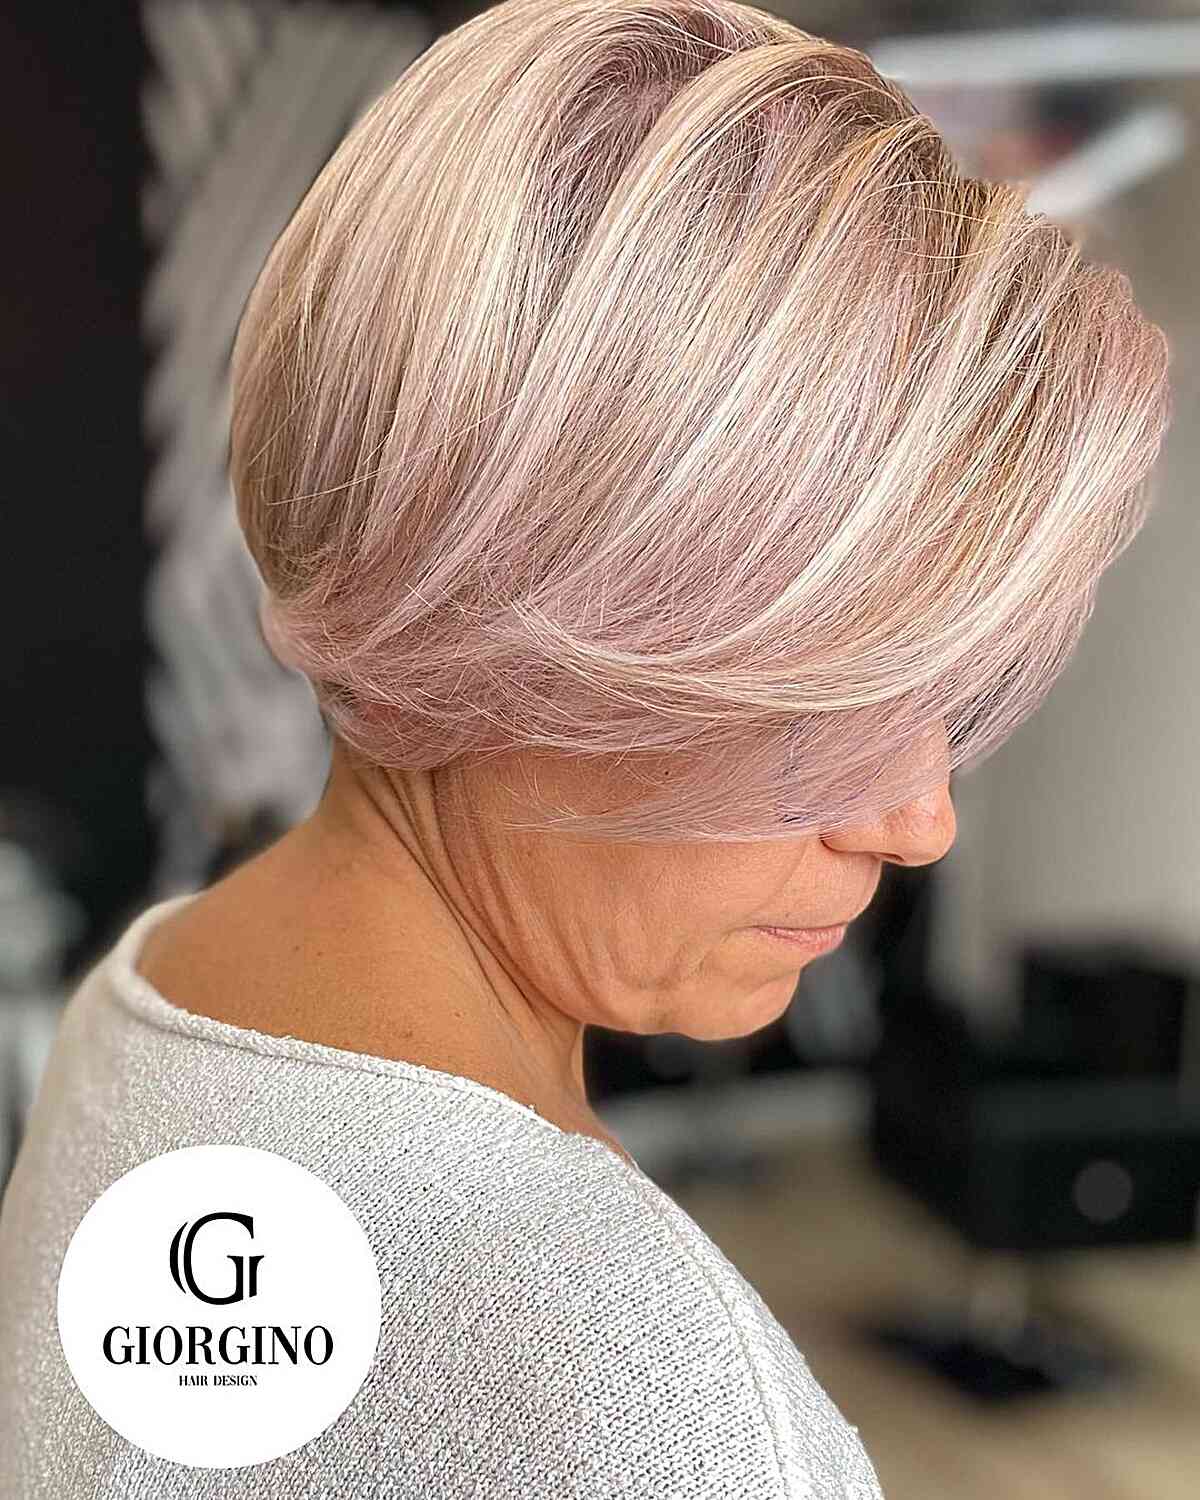 Bright Blonde Bixie Cut for Fine-Haired Women Over 50